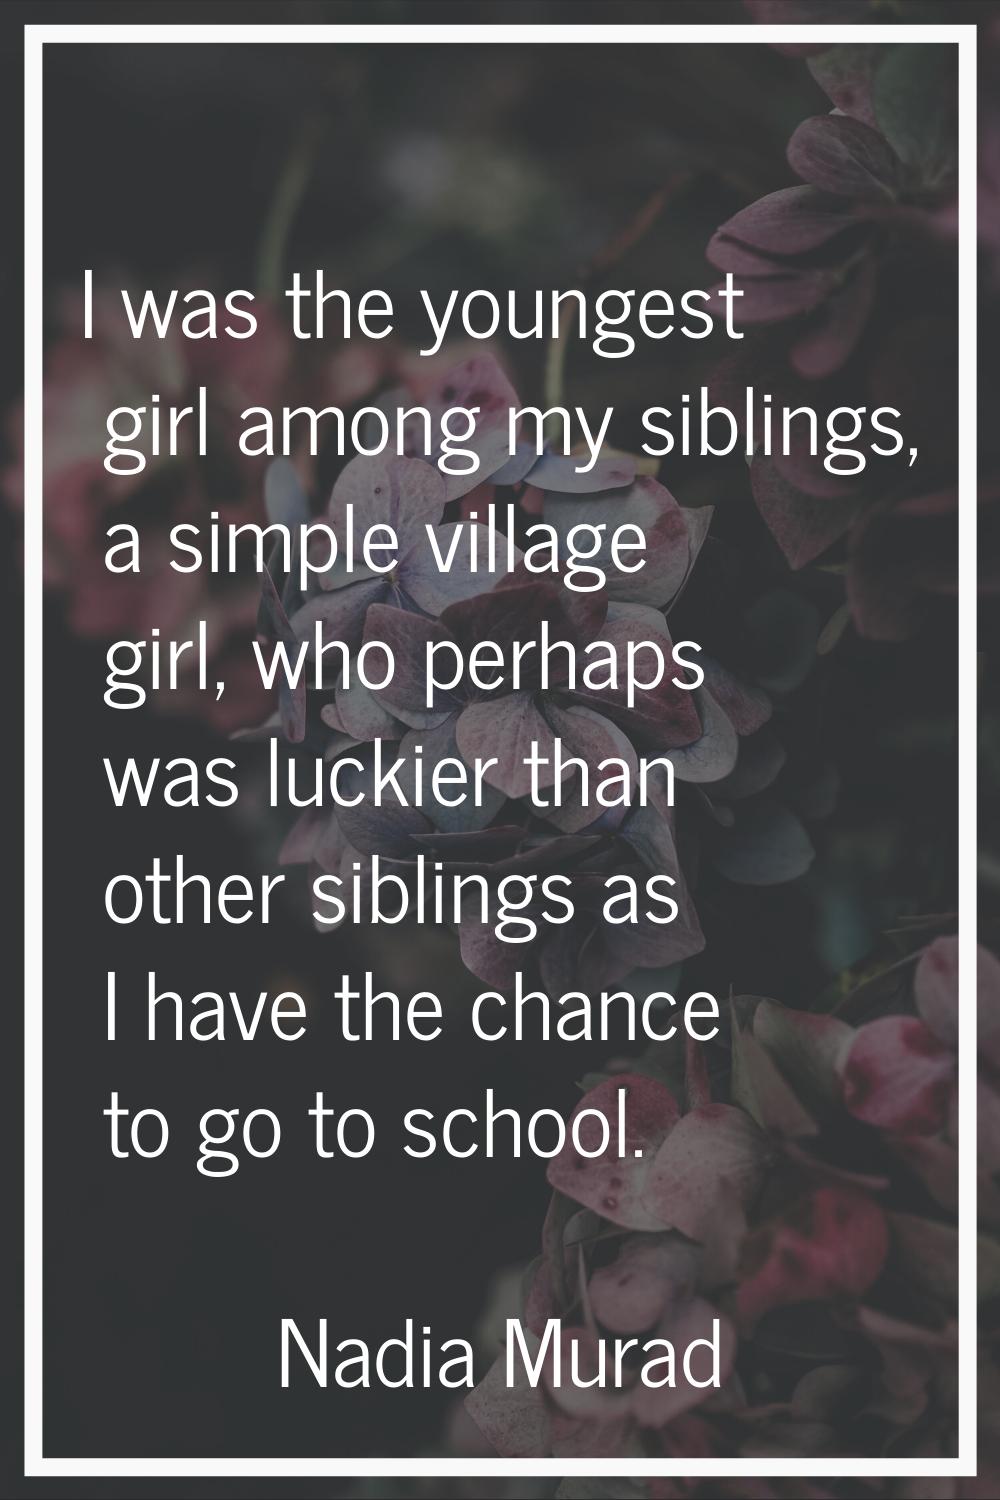 I was the youngest girl among my siblings, a simple village girl, who perhaps was luckier than othe